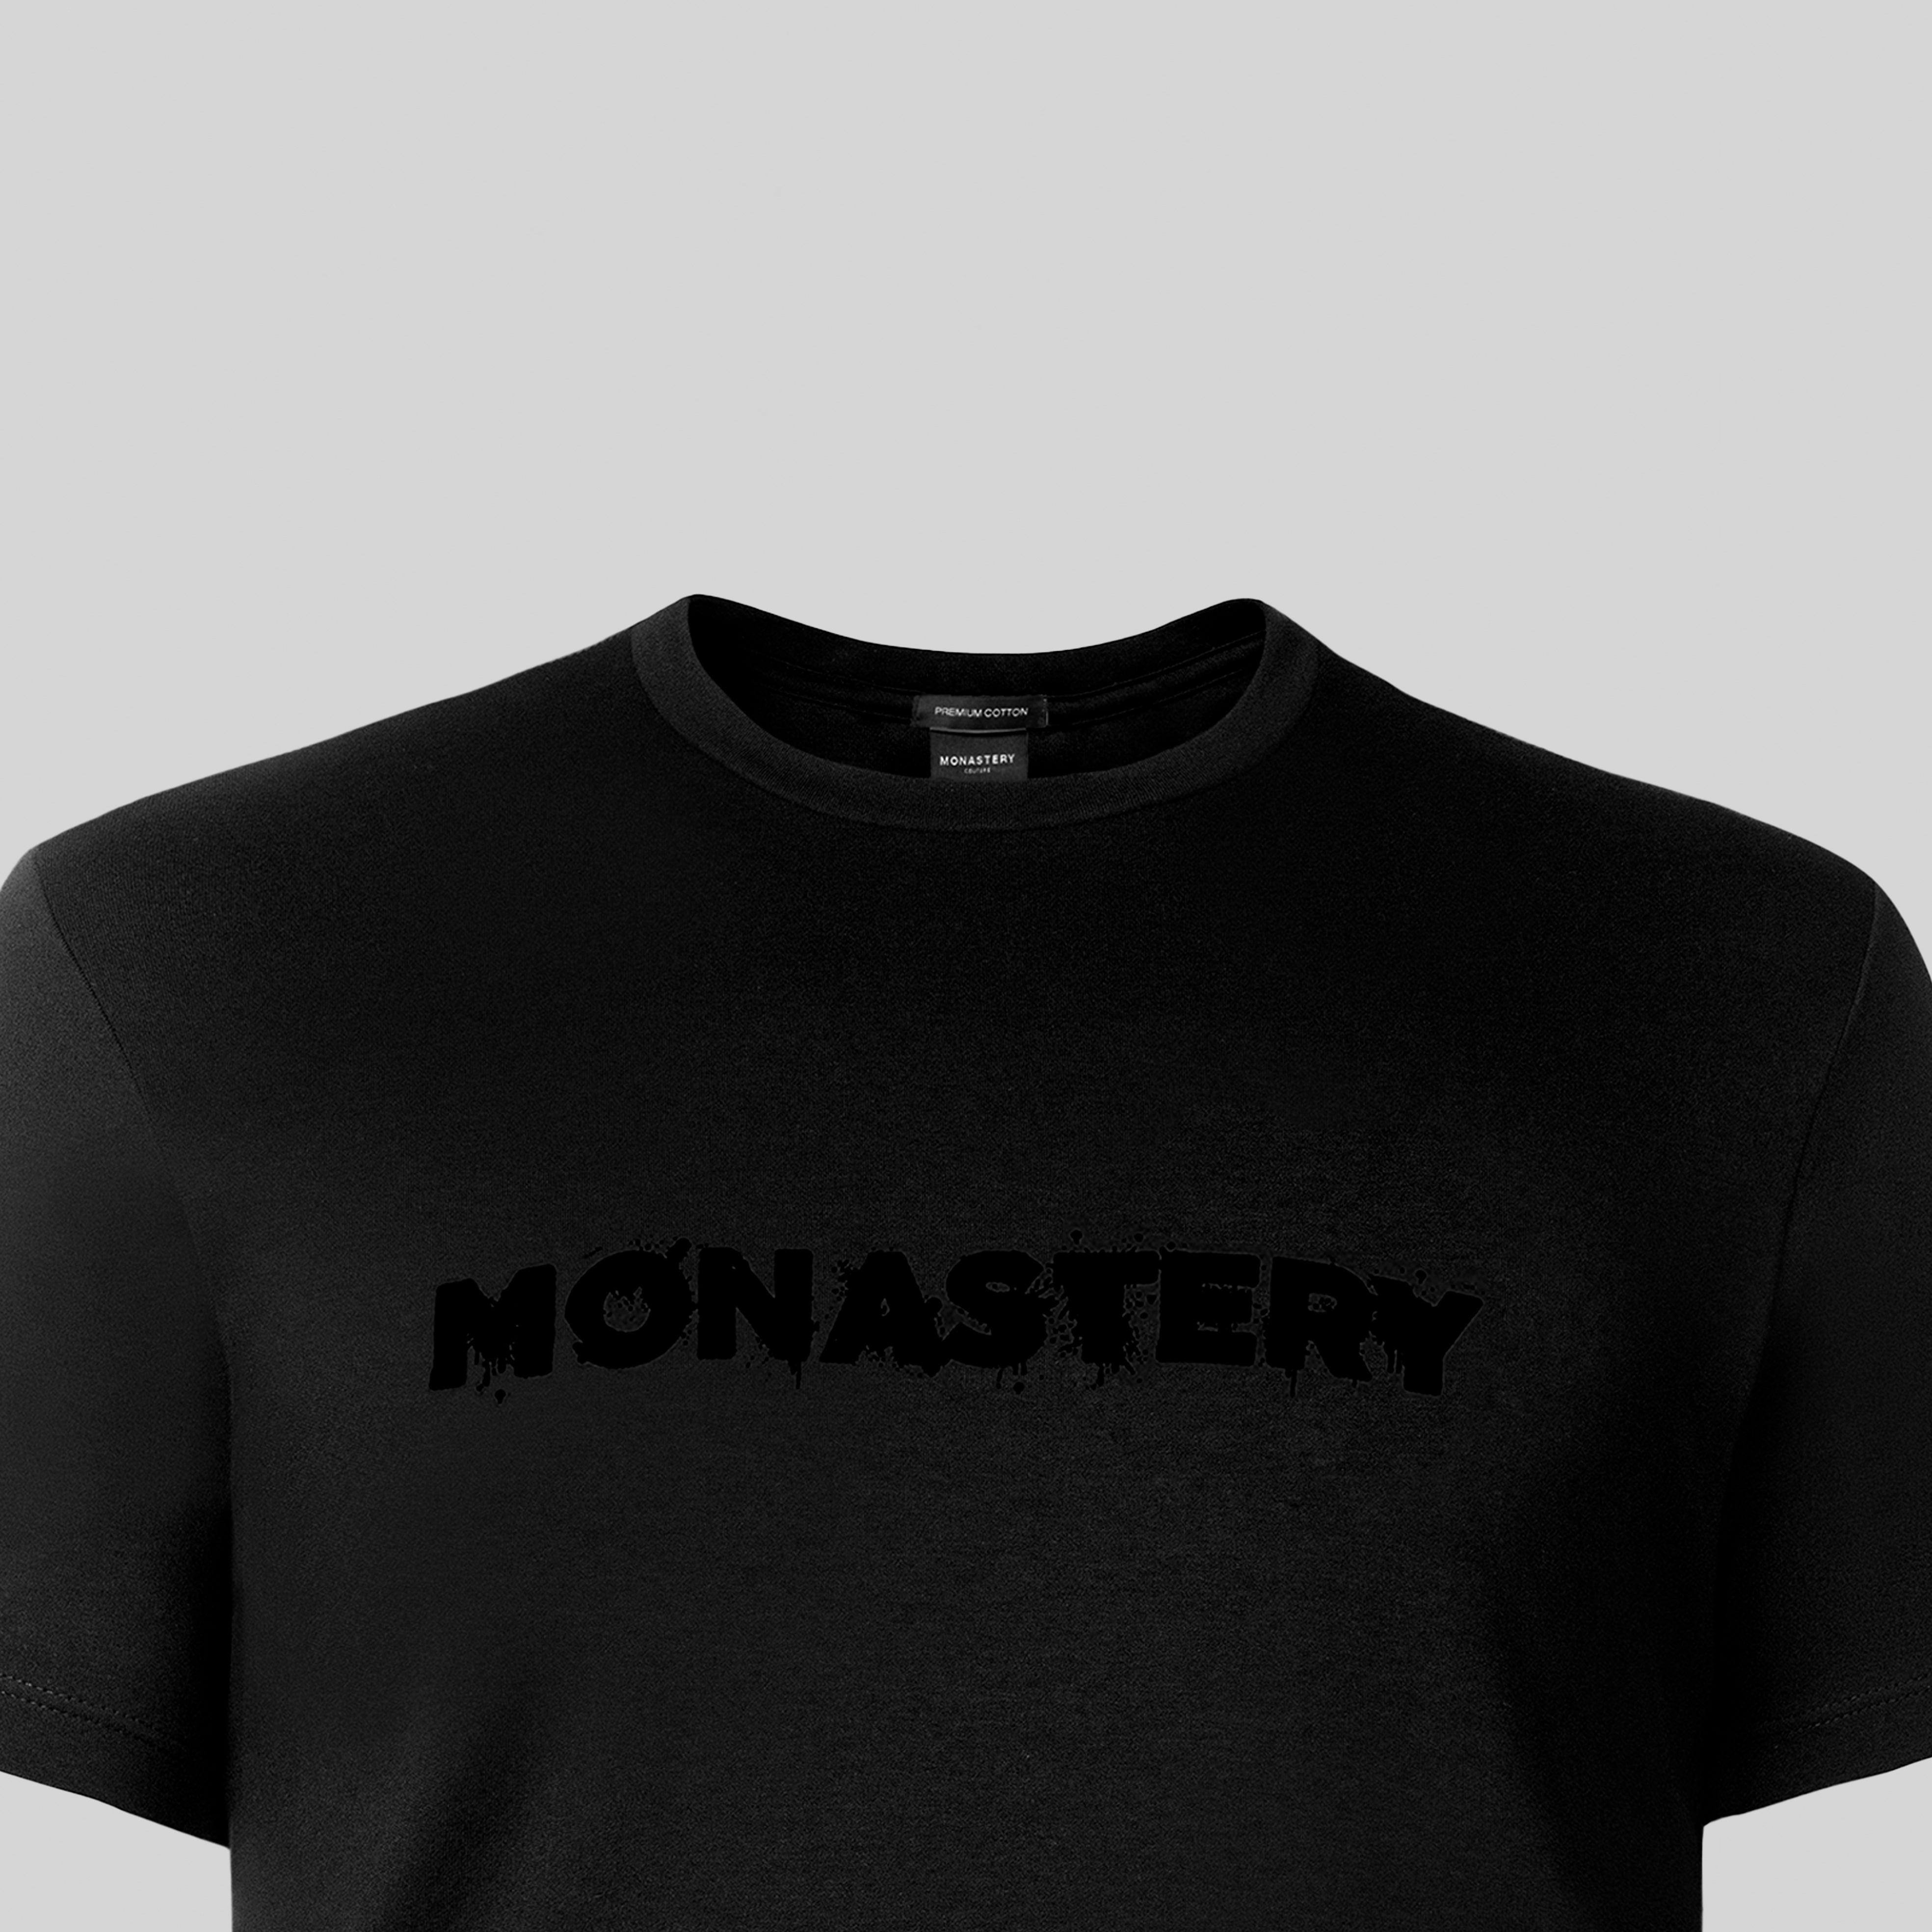 CONQUER T-SHIRT BLACK | Monastery Couture